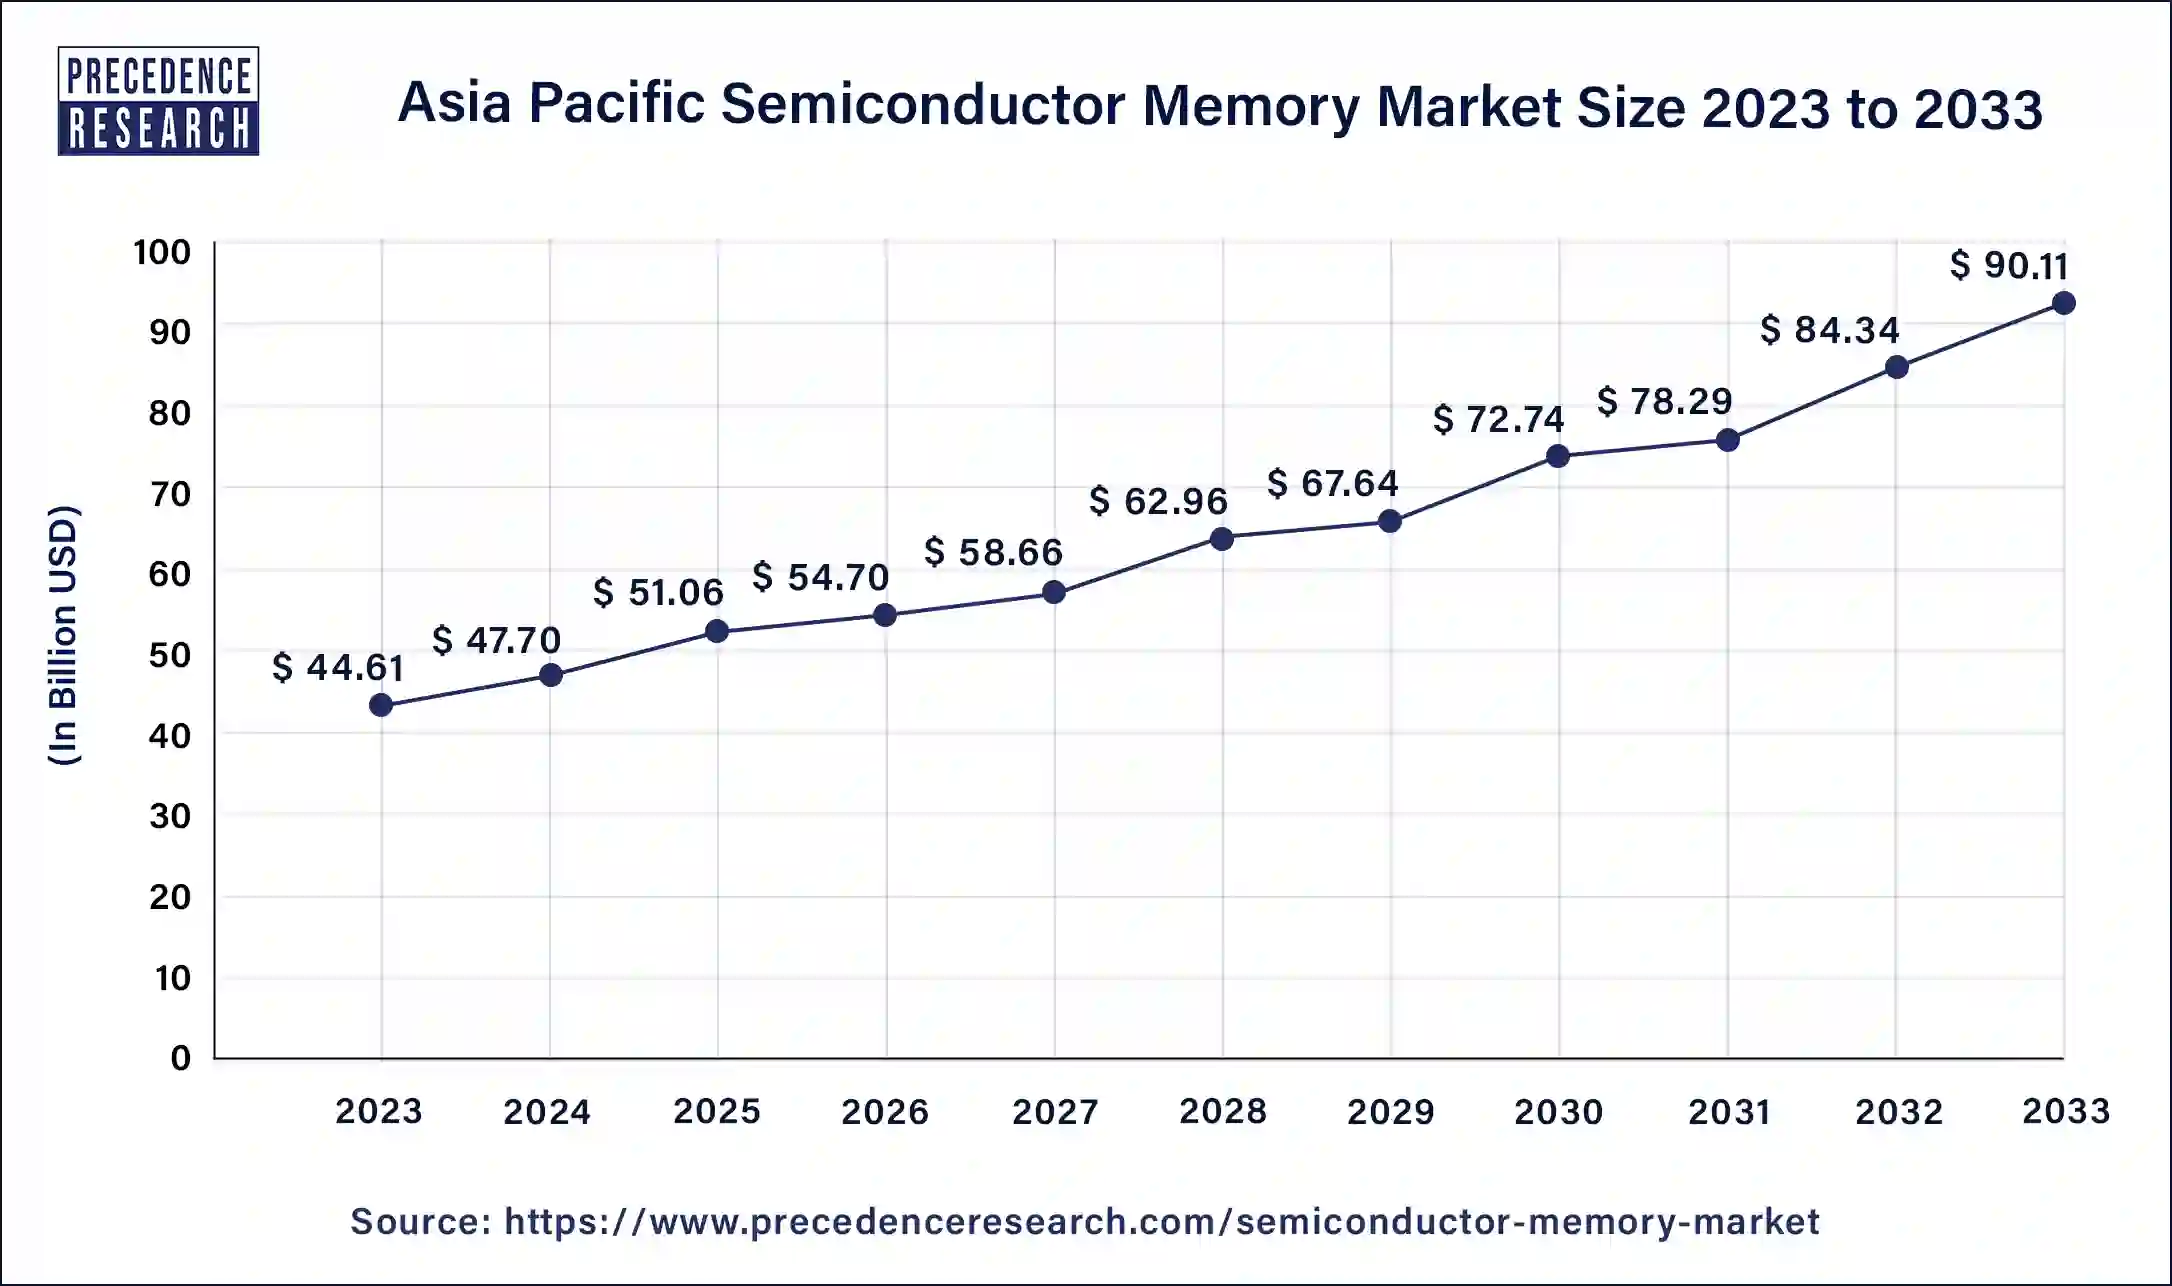 Asia Pacific Semiconductor Memory Market Size 2024 to 2033